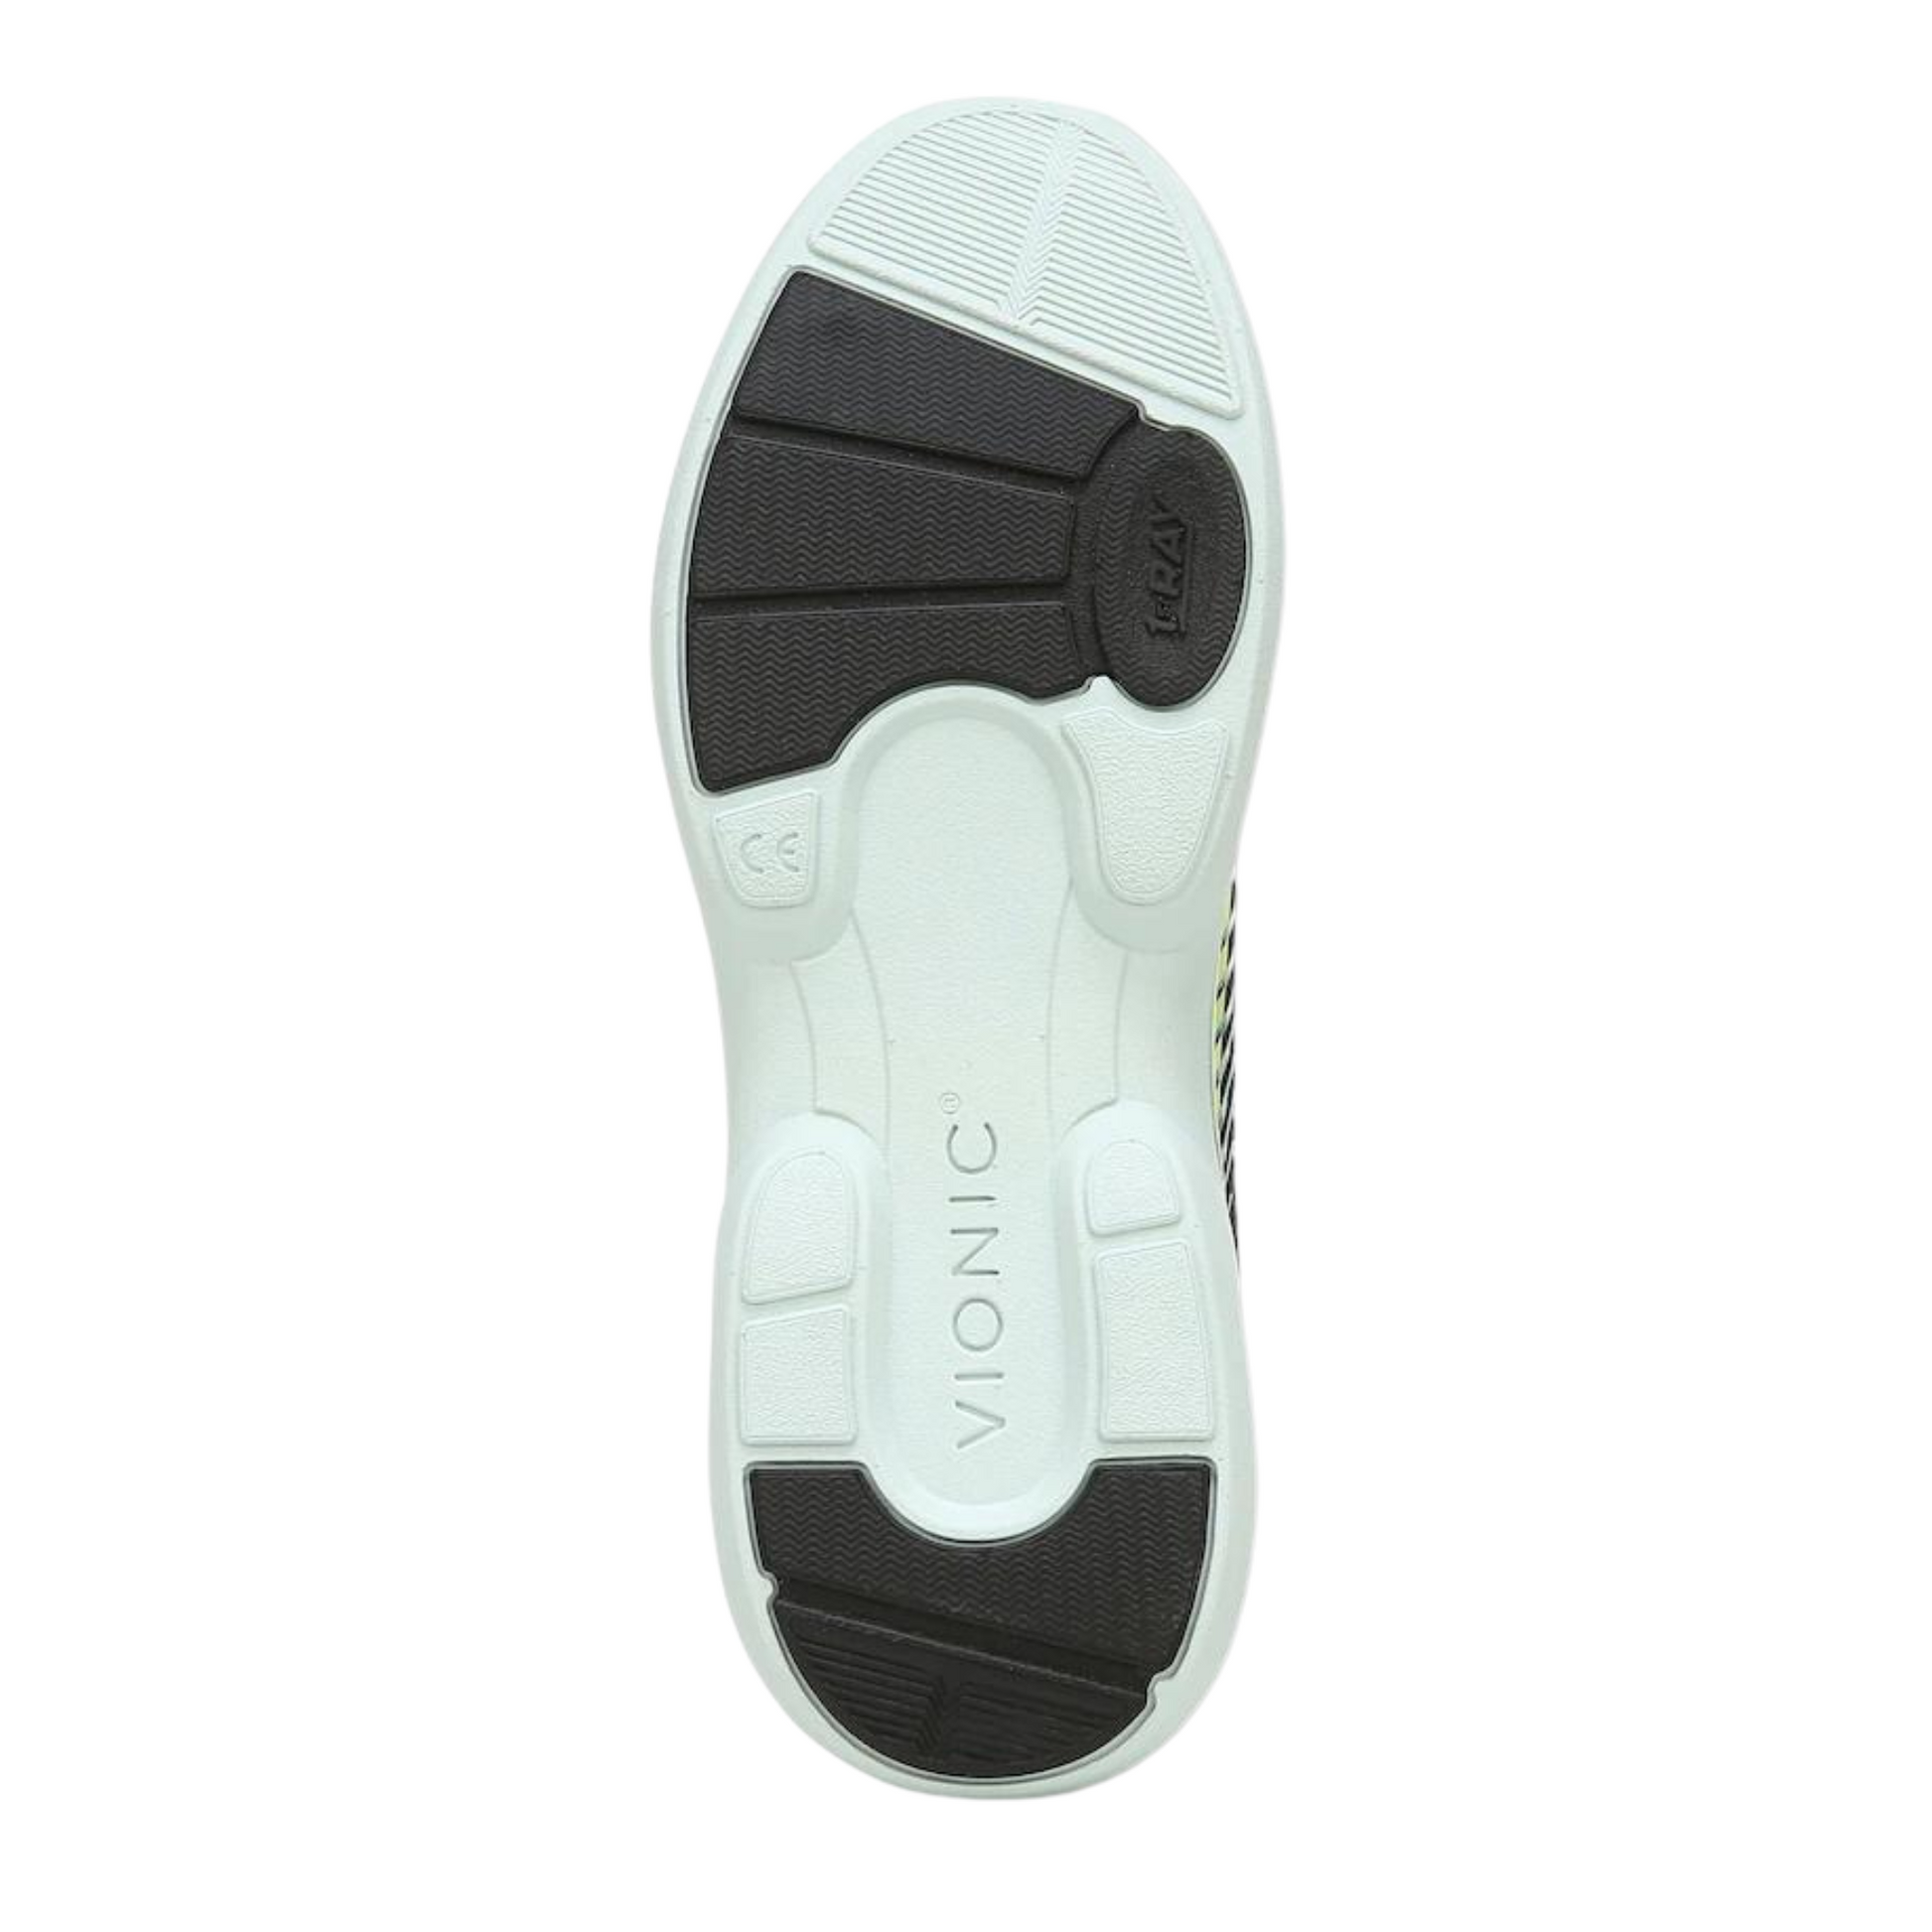 A bottom view of a sneaker with a white and black rubber outsole.